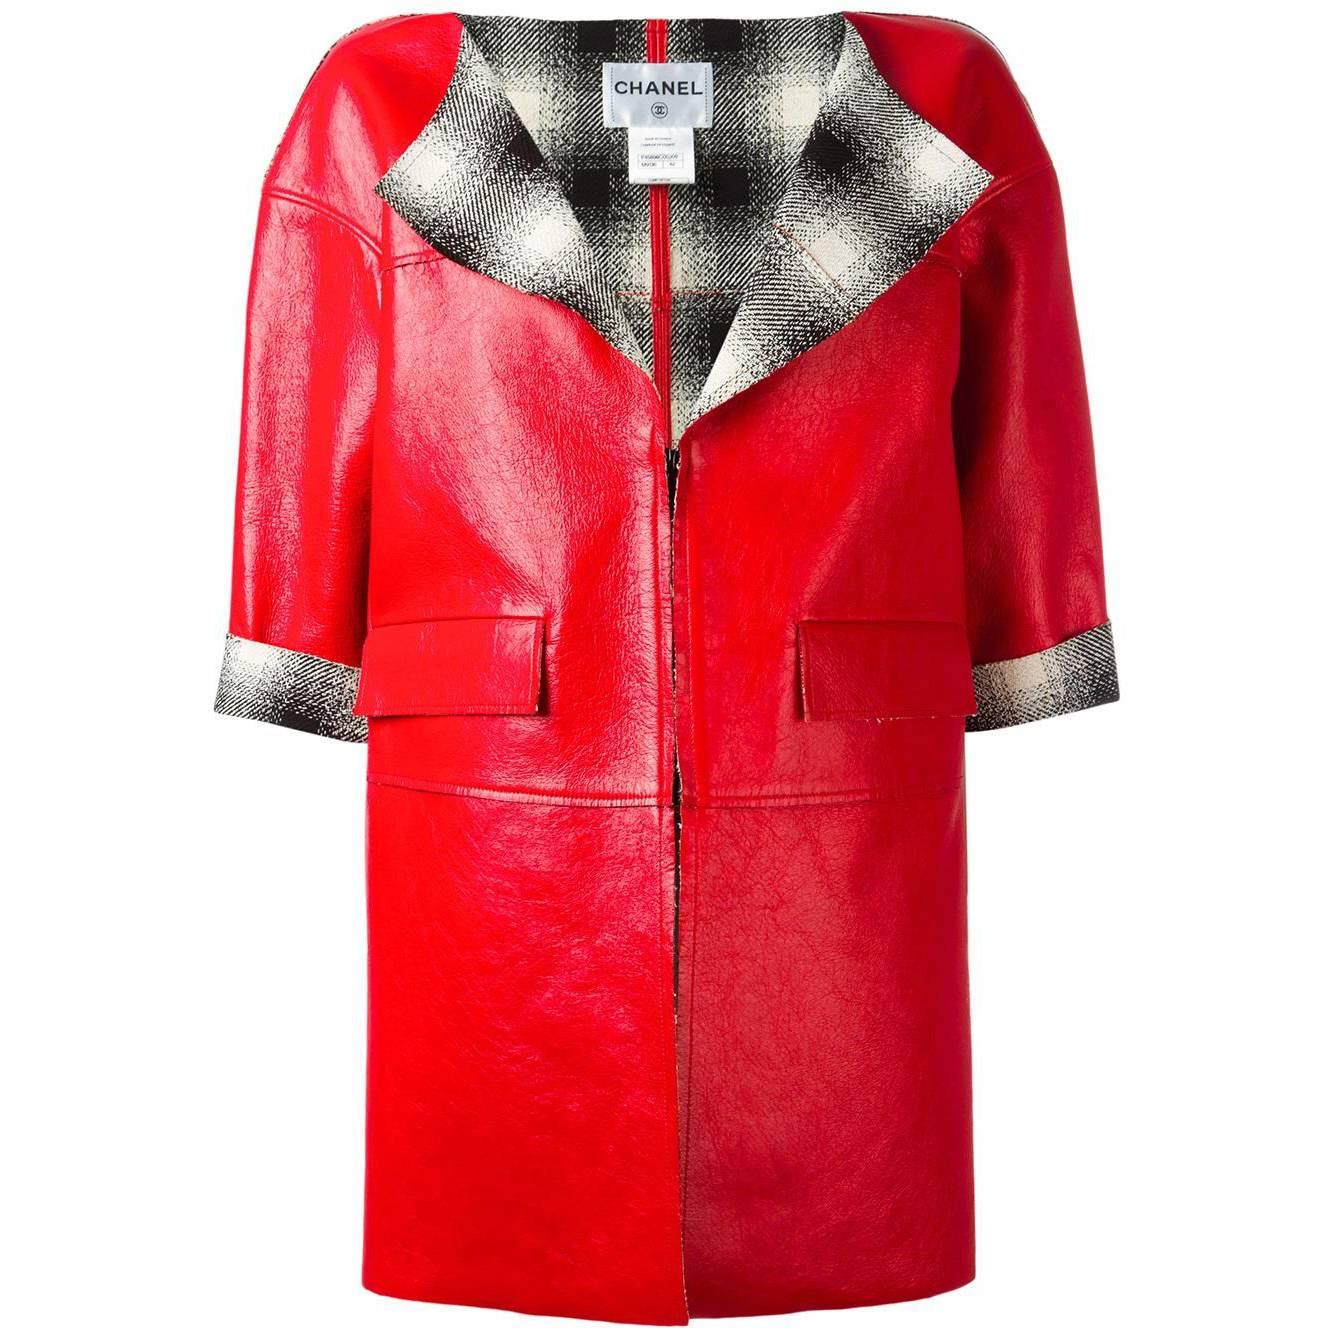 Chanel Red Leather Coat